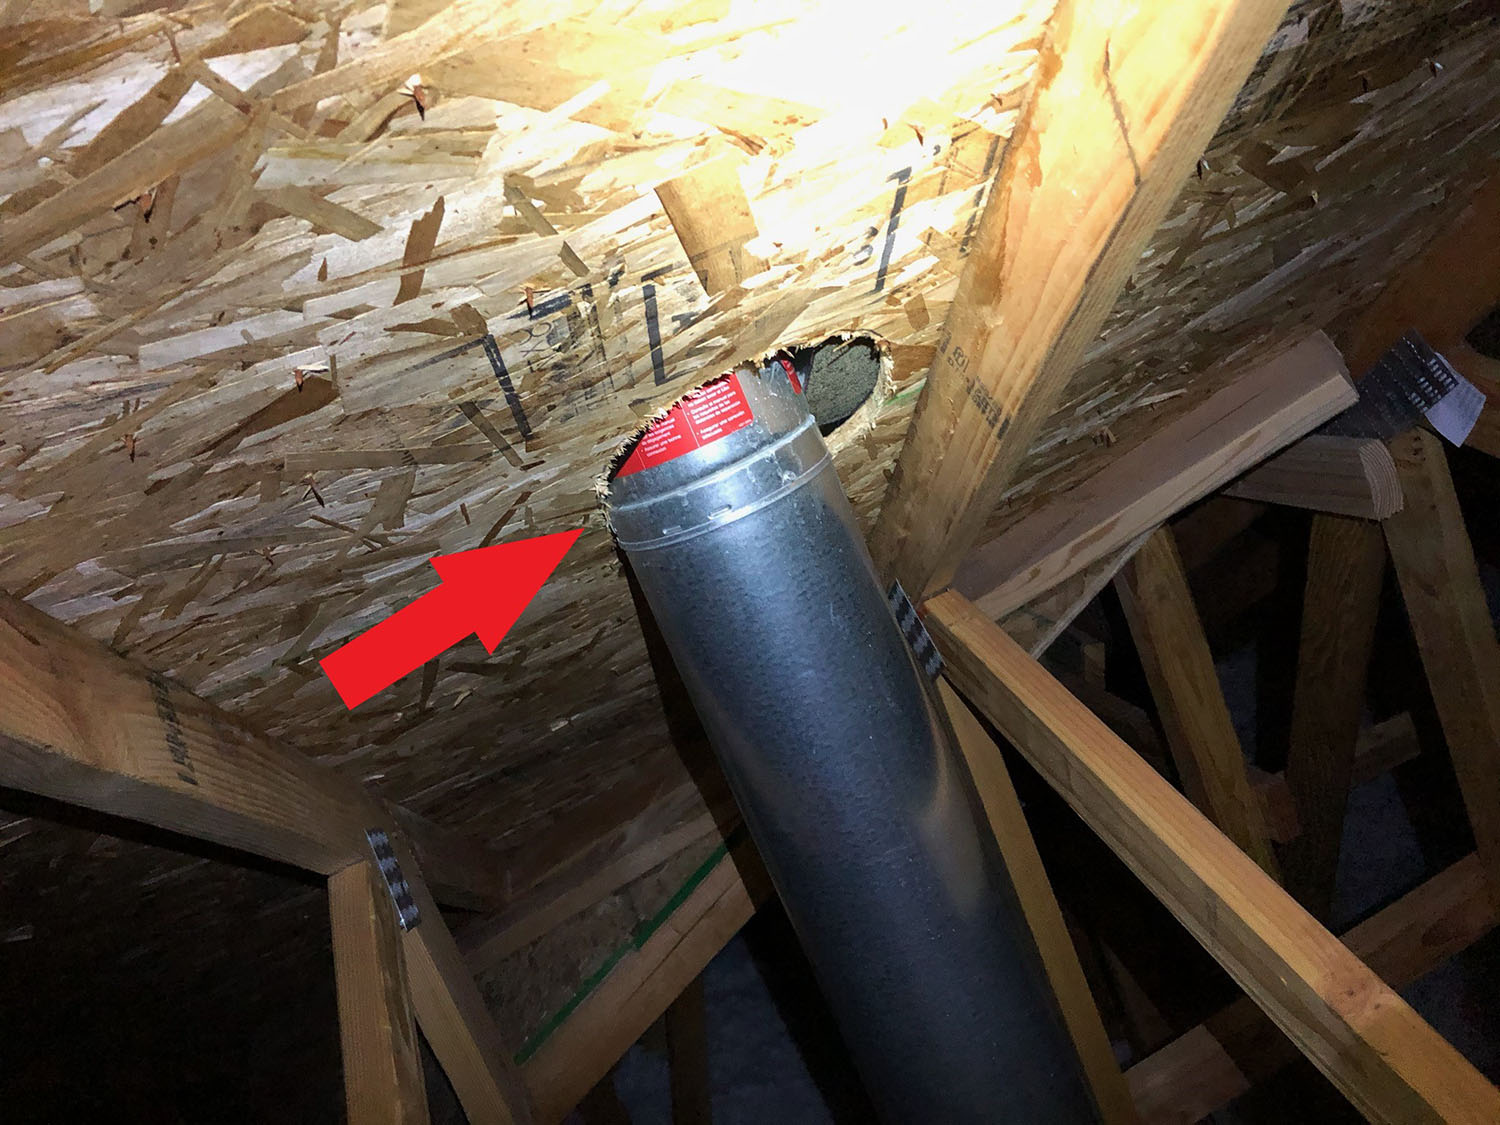 Flue Clearance not adequate - home inspector